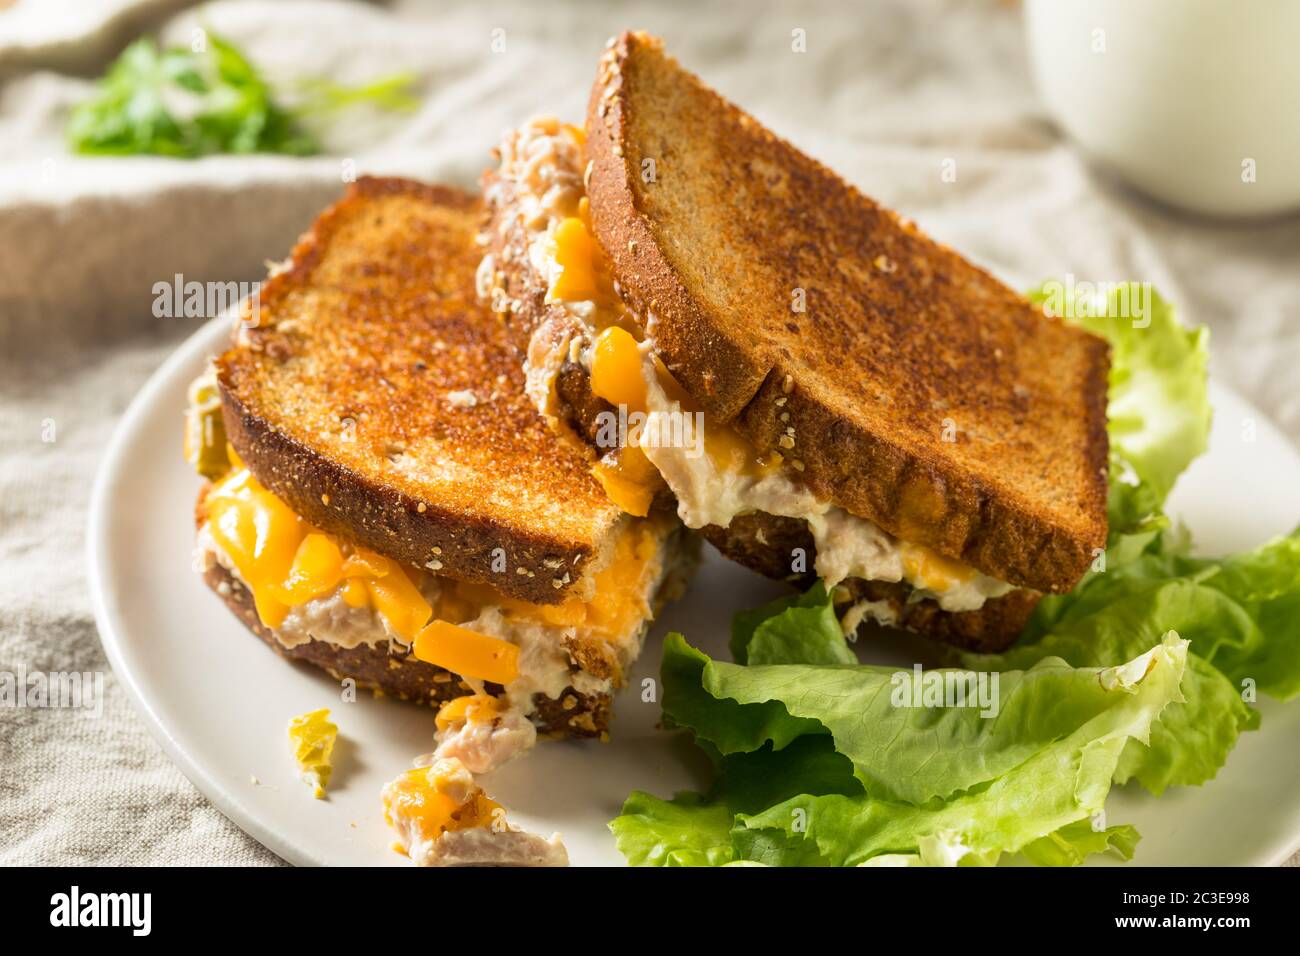 Homemade Toasted Tuna Melt Sandwich with Cheese Stock Photo